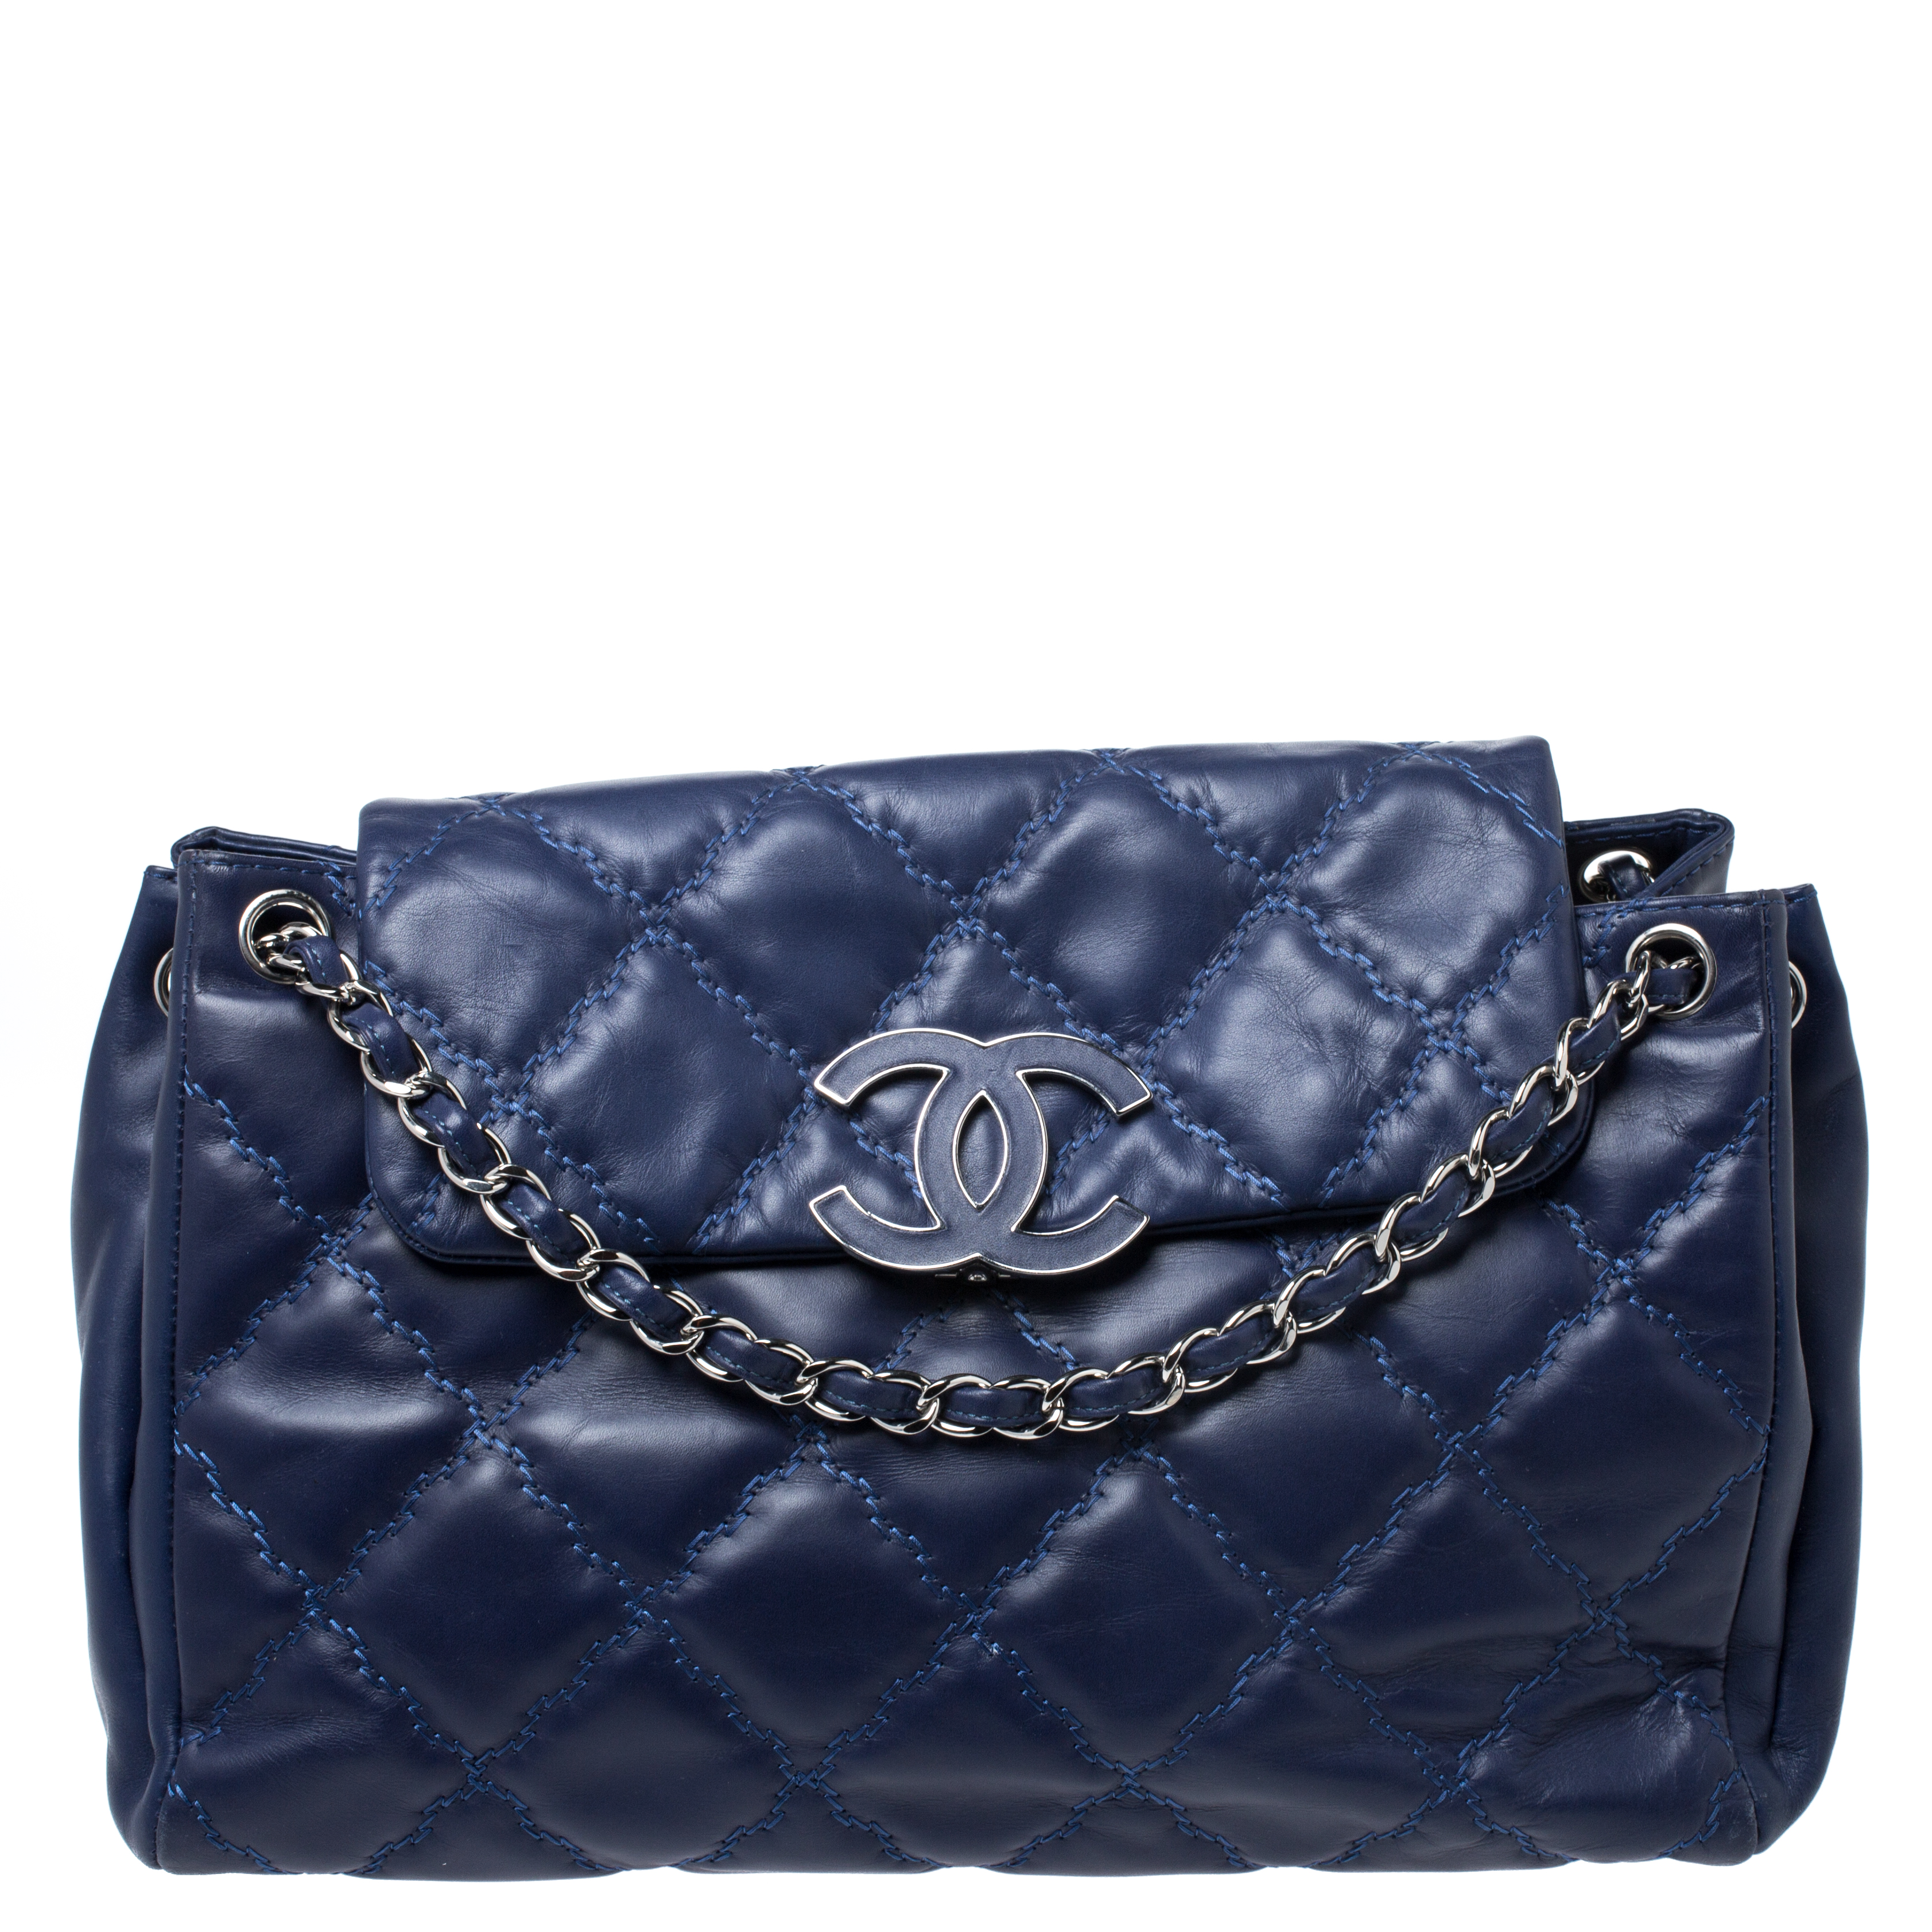 Chanel Electric Blue Quilted Leather Hampton Bag Chanel